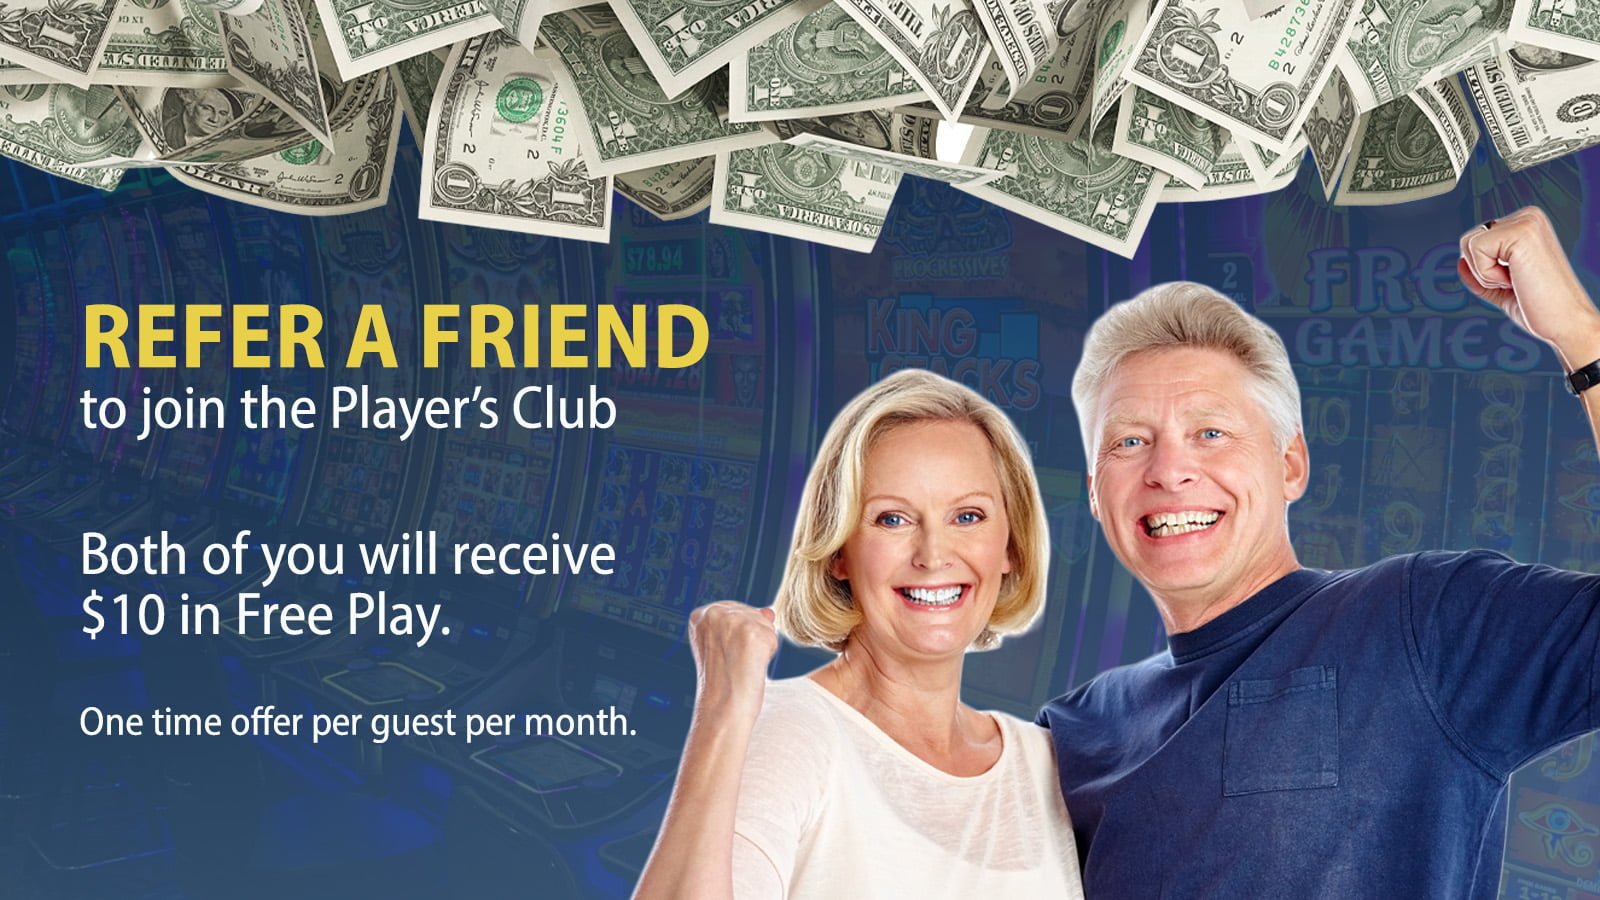 Refer A Friend At Mole Lake Casino In July And Receive $10 In Free Play